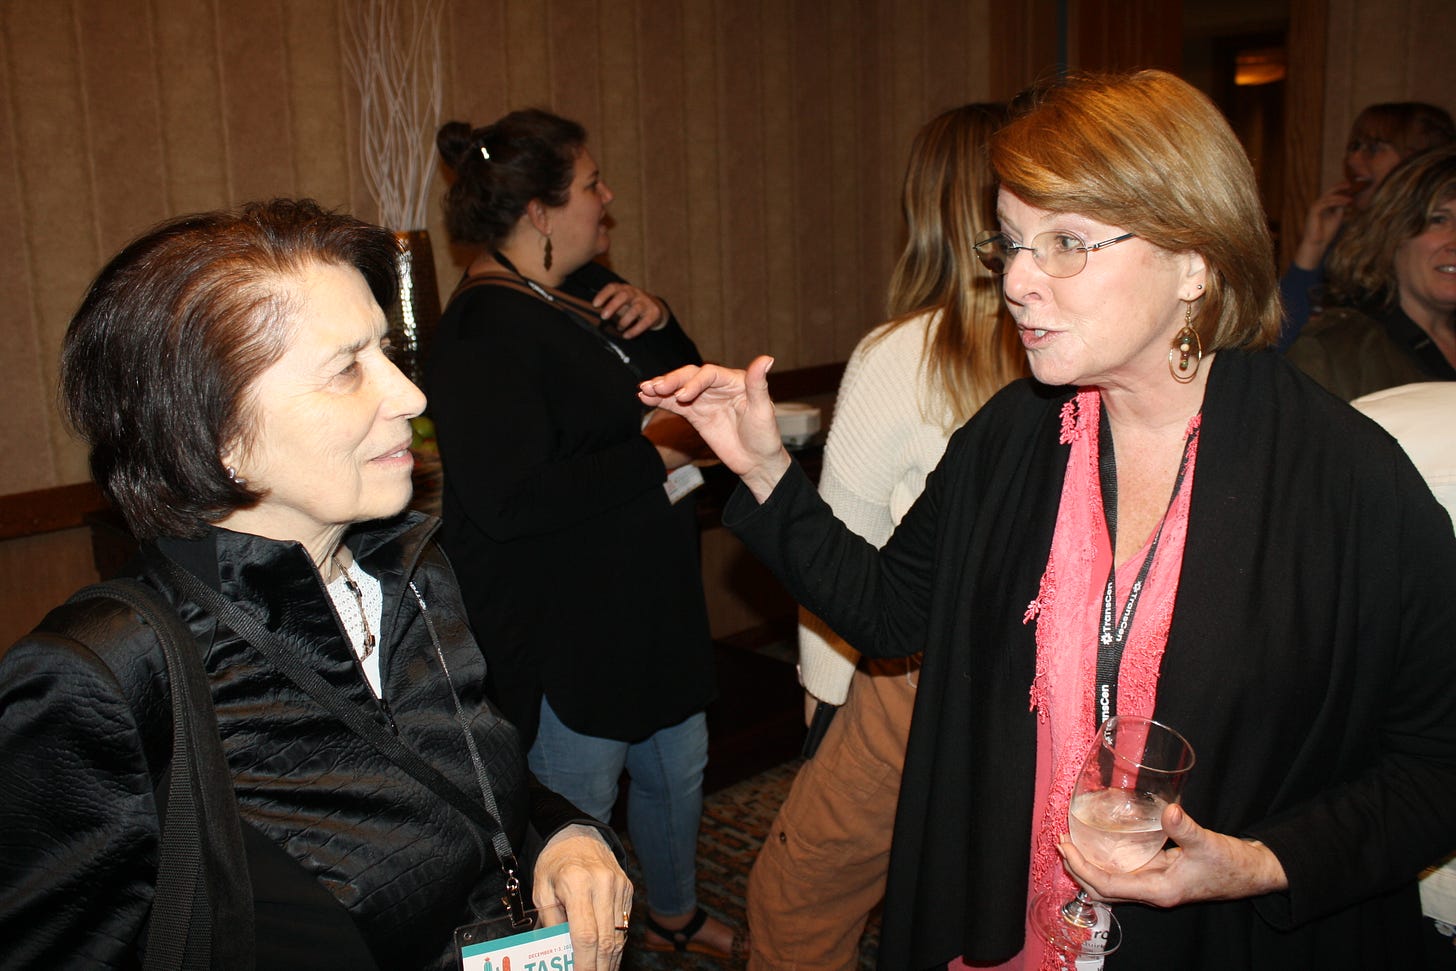 MCIE's CEO Carol Quirk speaking with Madeleine Will